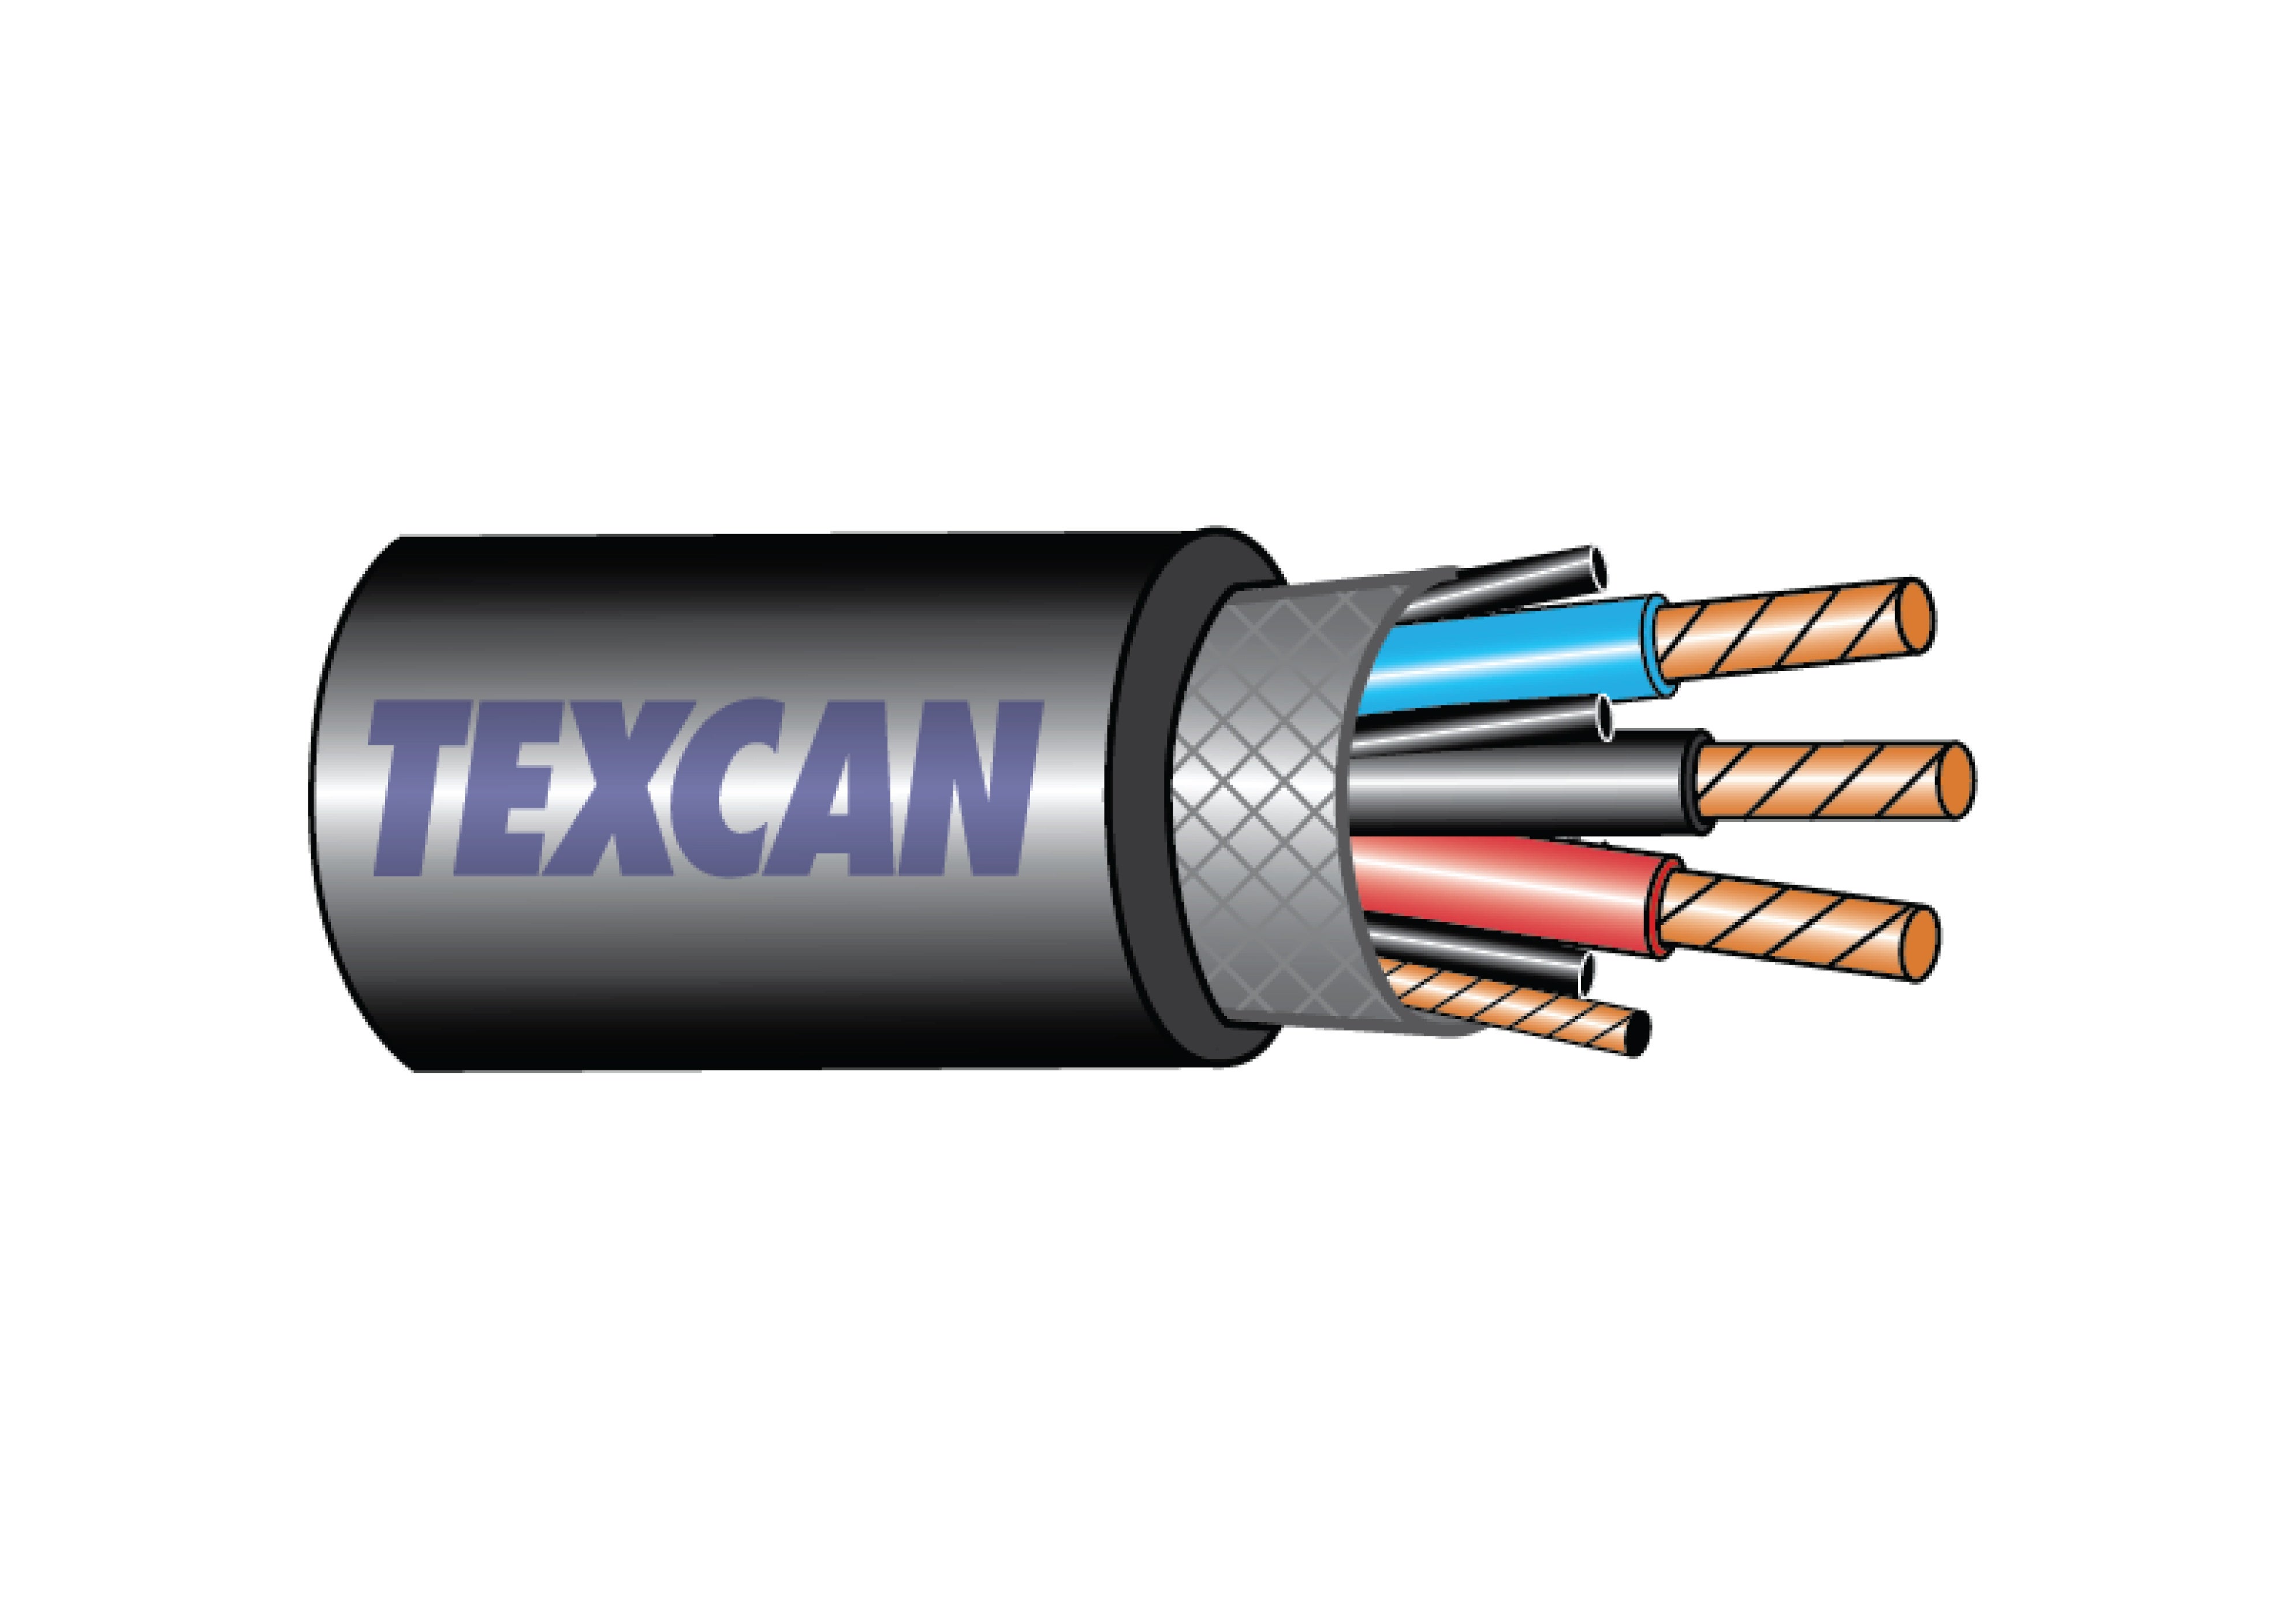 Texcan - Landing Pages - Southwire - Mining Cables.jpg